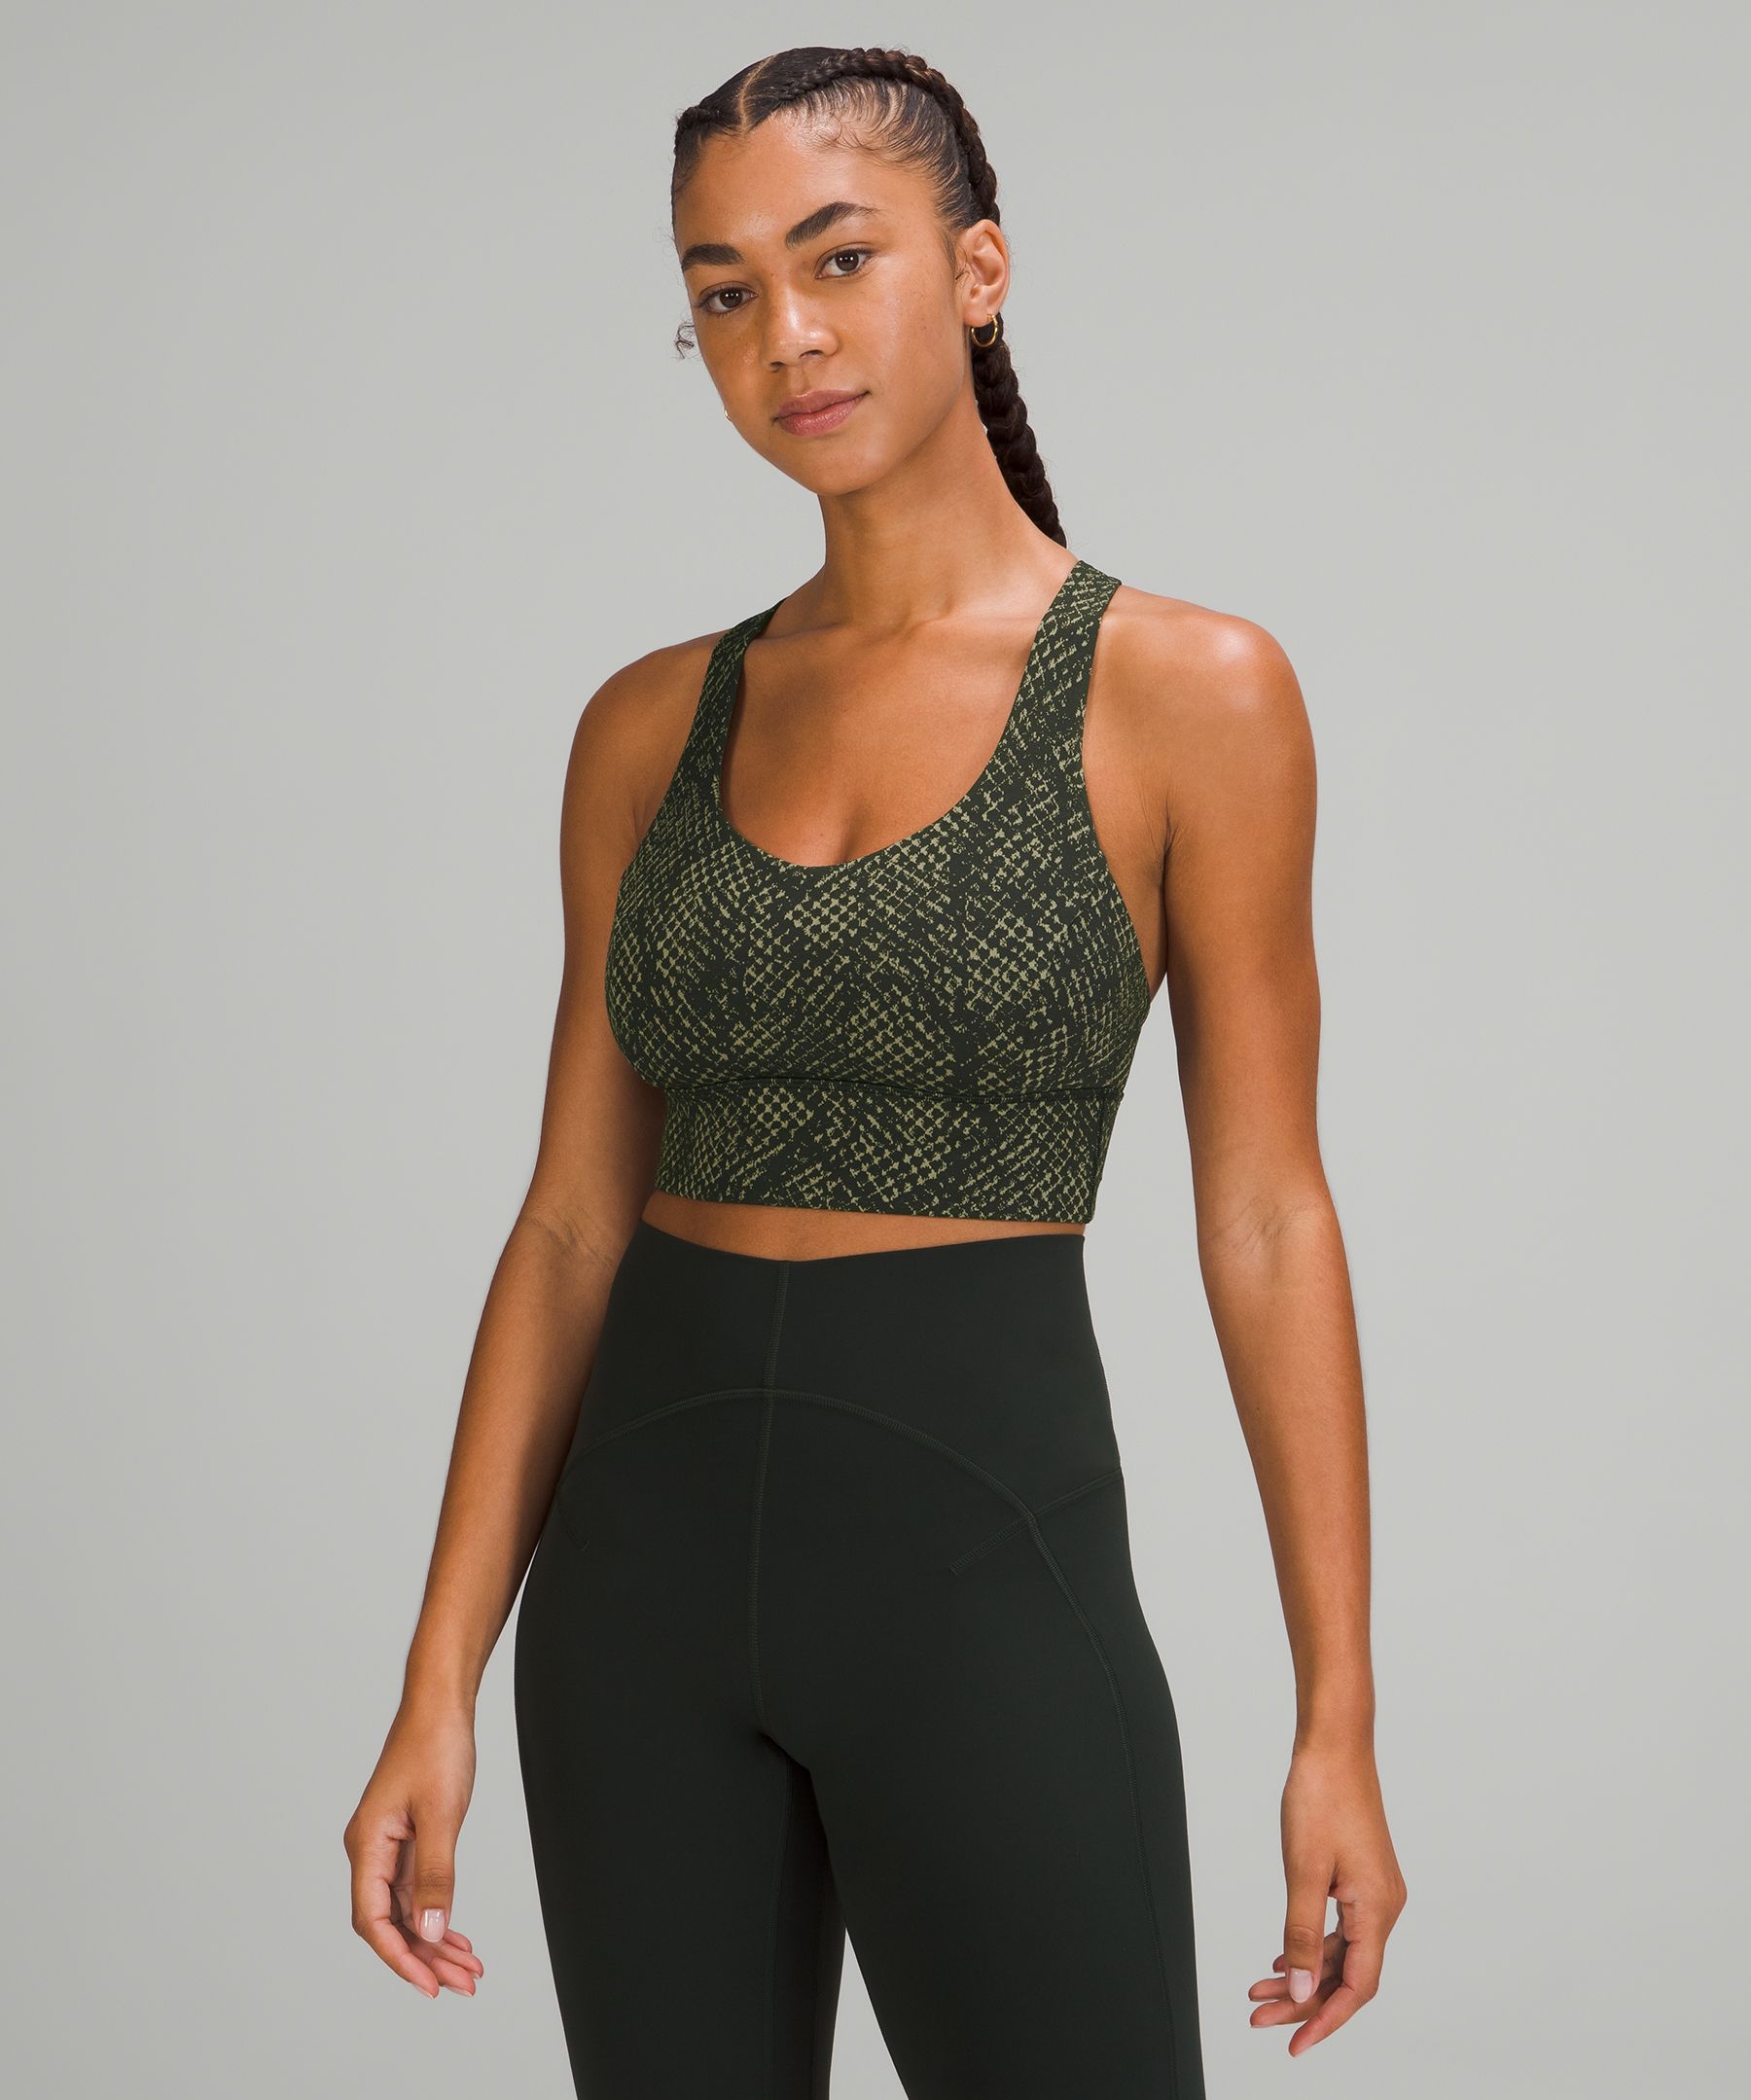 Lululemon Bra Comparison: Free to Be Serene Versus Free to Be Elevated -  Agent Athletica